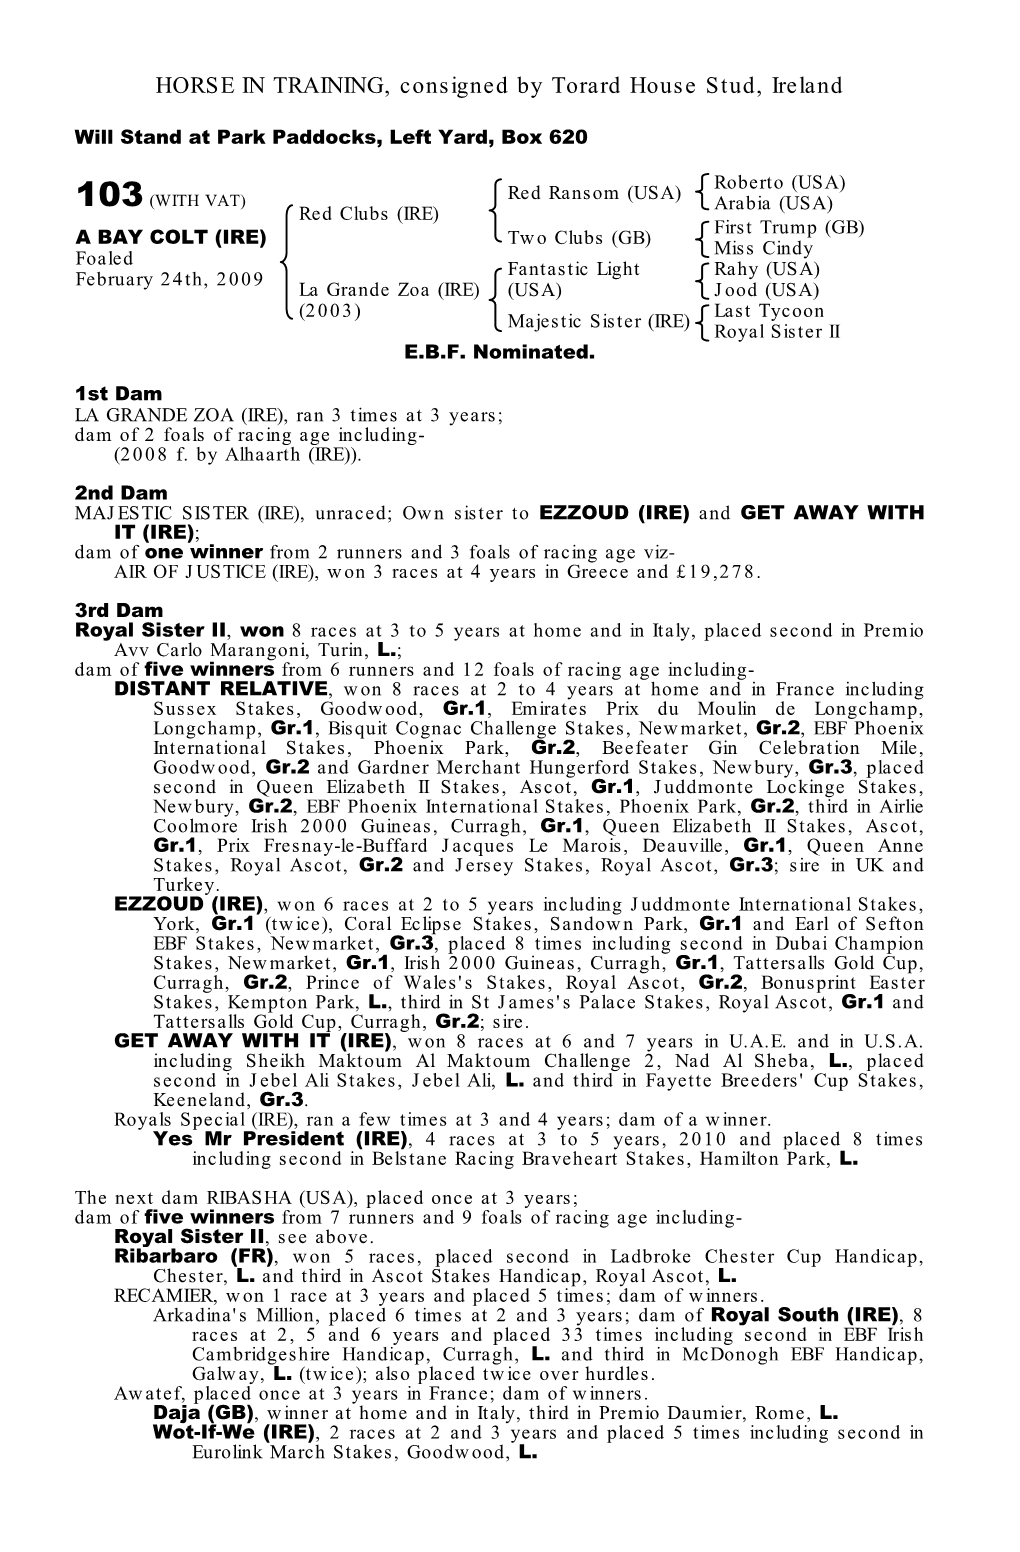 HORSE in TRAINING, Consigned by Torard House Stud, Ireland